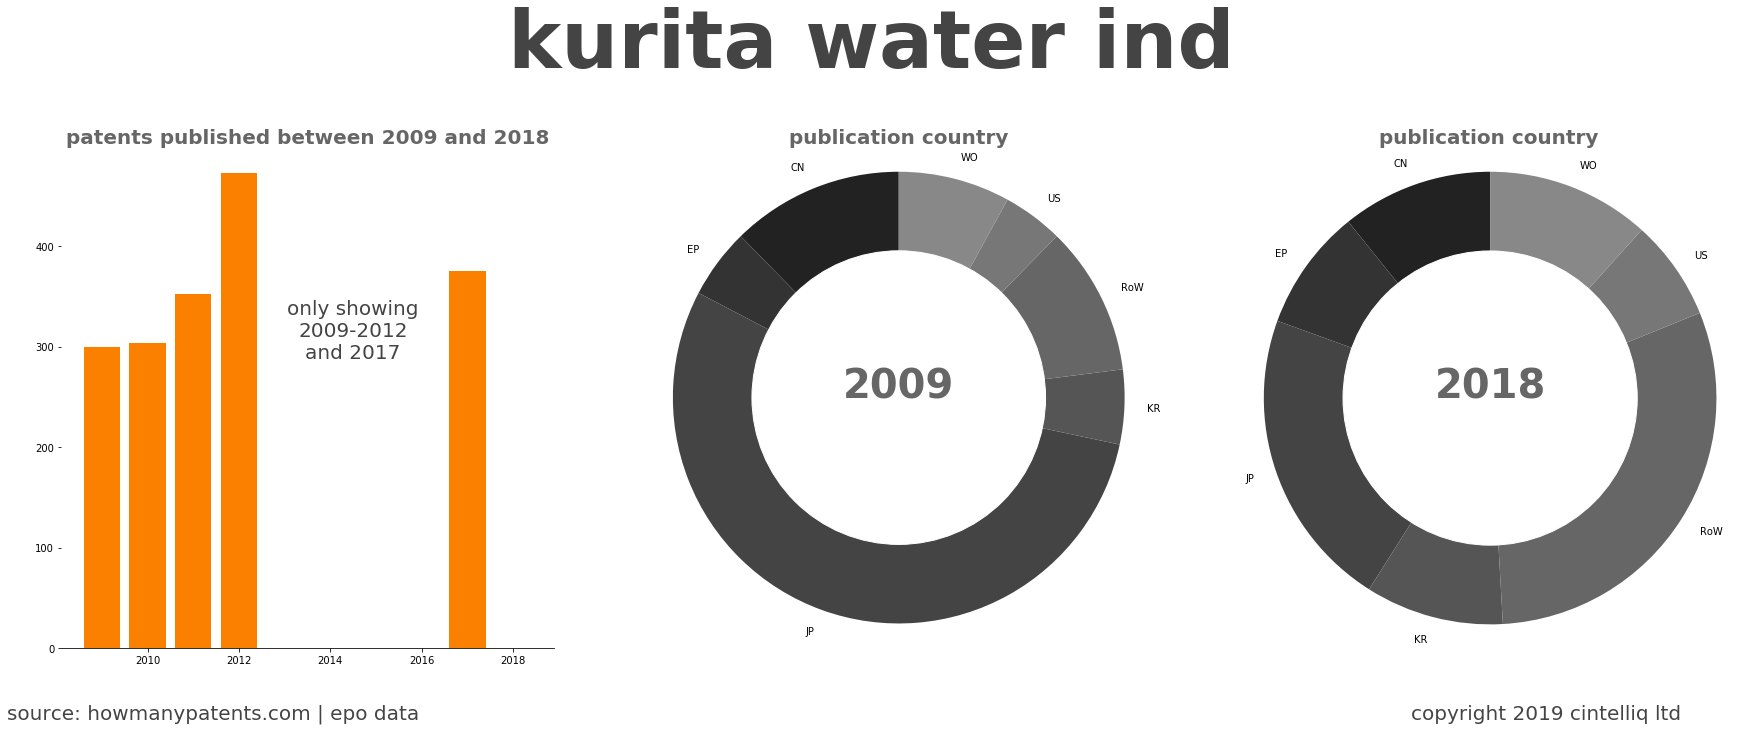 summary of patents for Kurita Water Ind